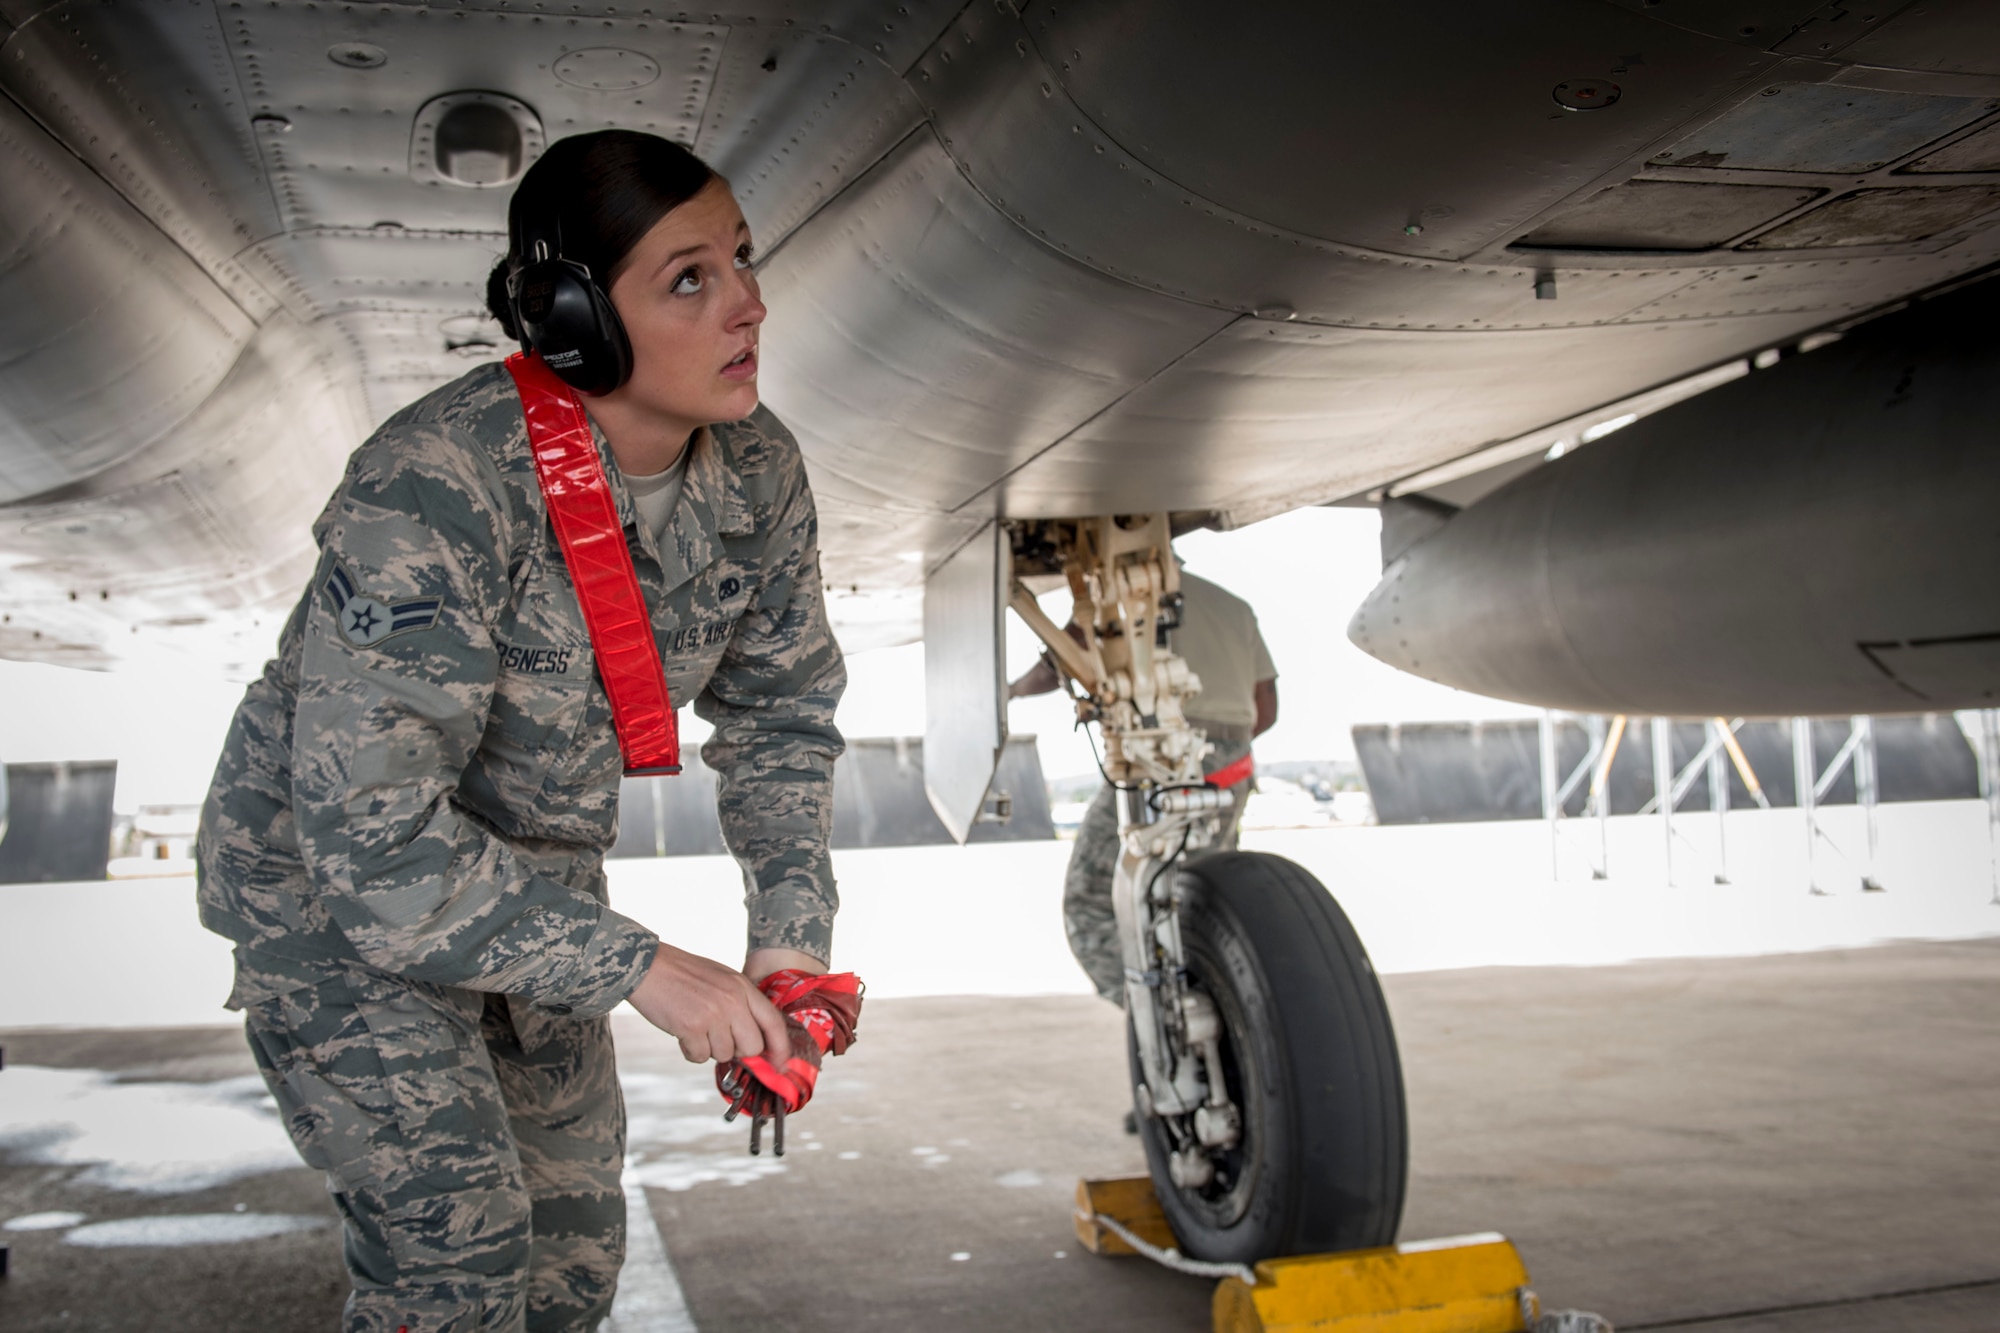 U.S. Air Force Airman 1st Class Victoria Barsness, 67th Aircraft Maintenance Squadron weapons team load member, arms an F-15 Eagle Feb. 23, 2017, at Andersen Air Force Base, Guam. Barsness is one of more than 2,700 other U.S., Australian and Japanese servicemembers participating in Cope North, an annual exercise that provides aircrew with real-time war scenarios and helps ground crews test their readiness capabilities. (U.S. Air Force photo by Senior Airman John Linzmeier)